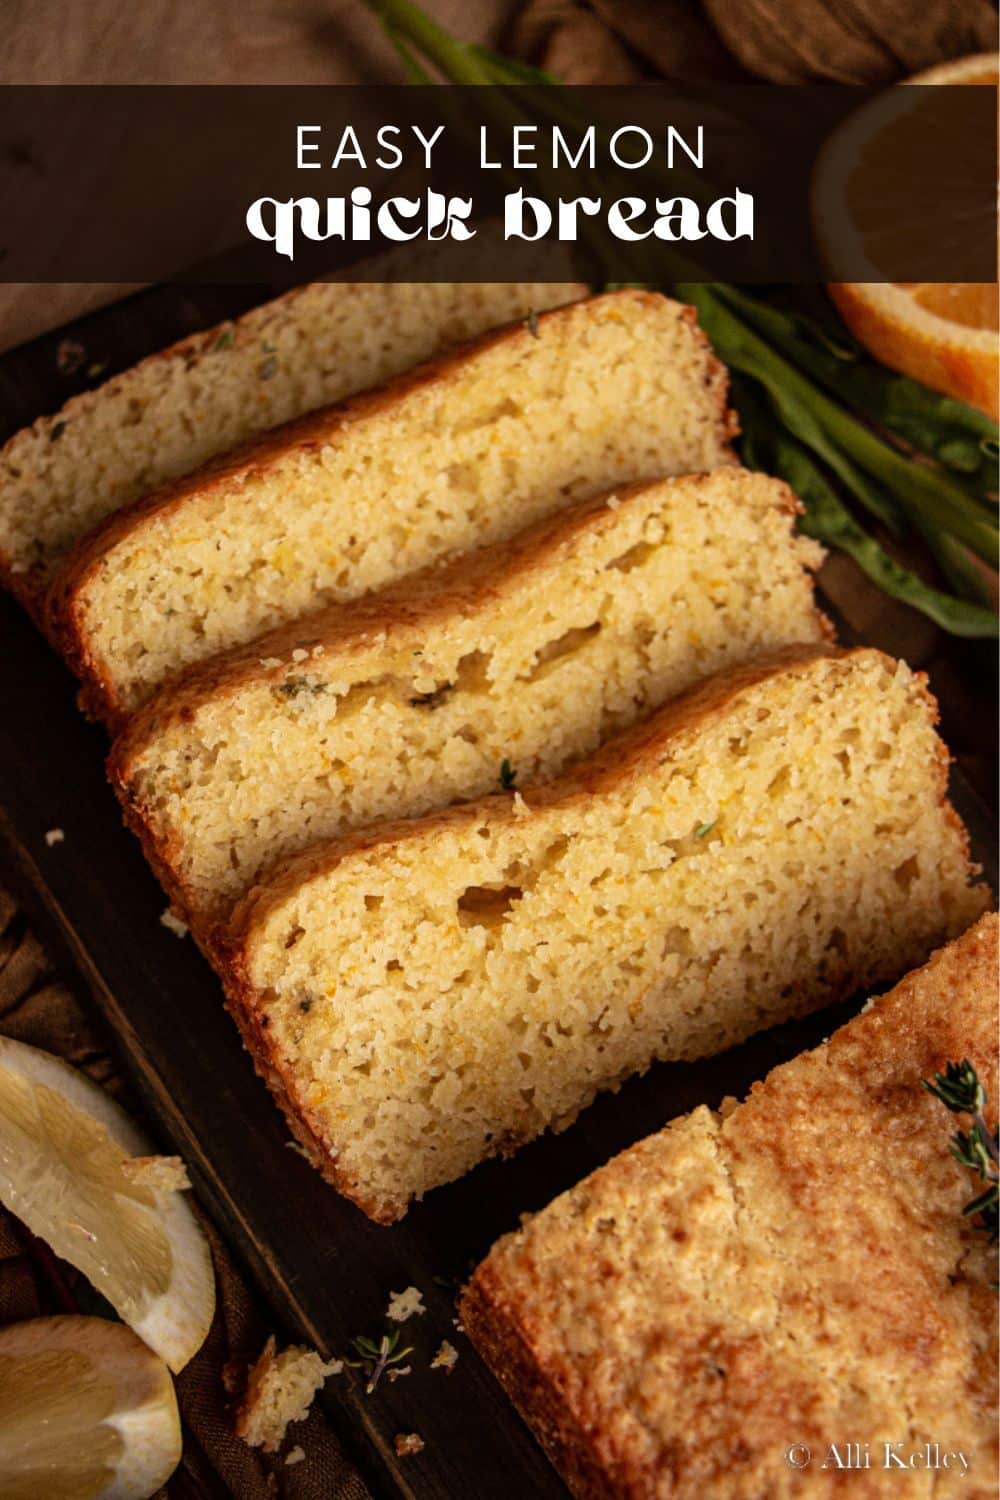 Bursting with fresh flavor, my lemon bread recipe will have your taste buds singing! This sweet treat is bursting with citrusy goodness from both lemons and oranges, creating an unbeatable combination. With the addition of thyme, this lemon bread is truly something special - and it can easily be customized to suit your tastes!